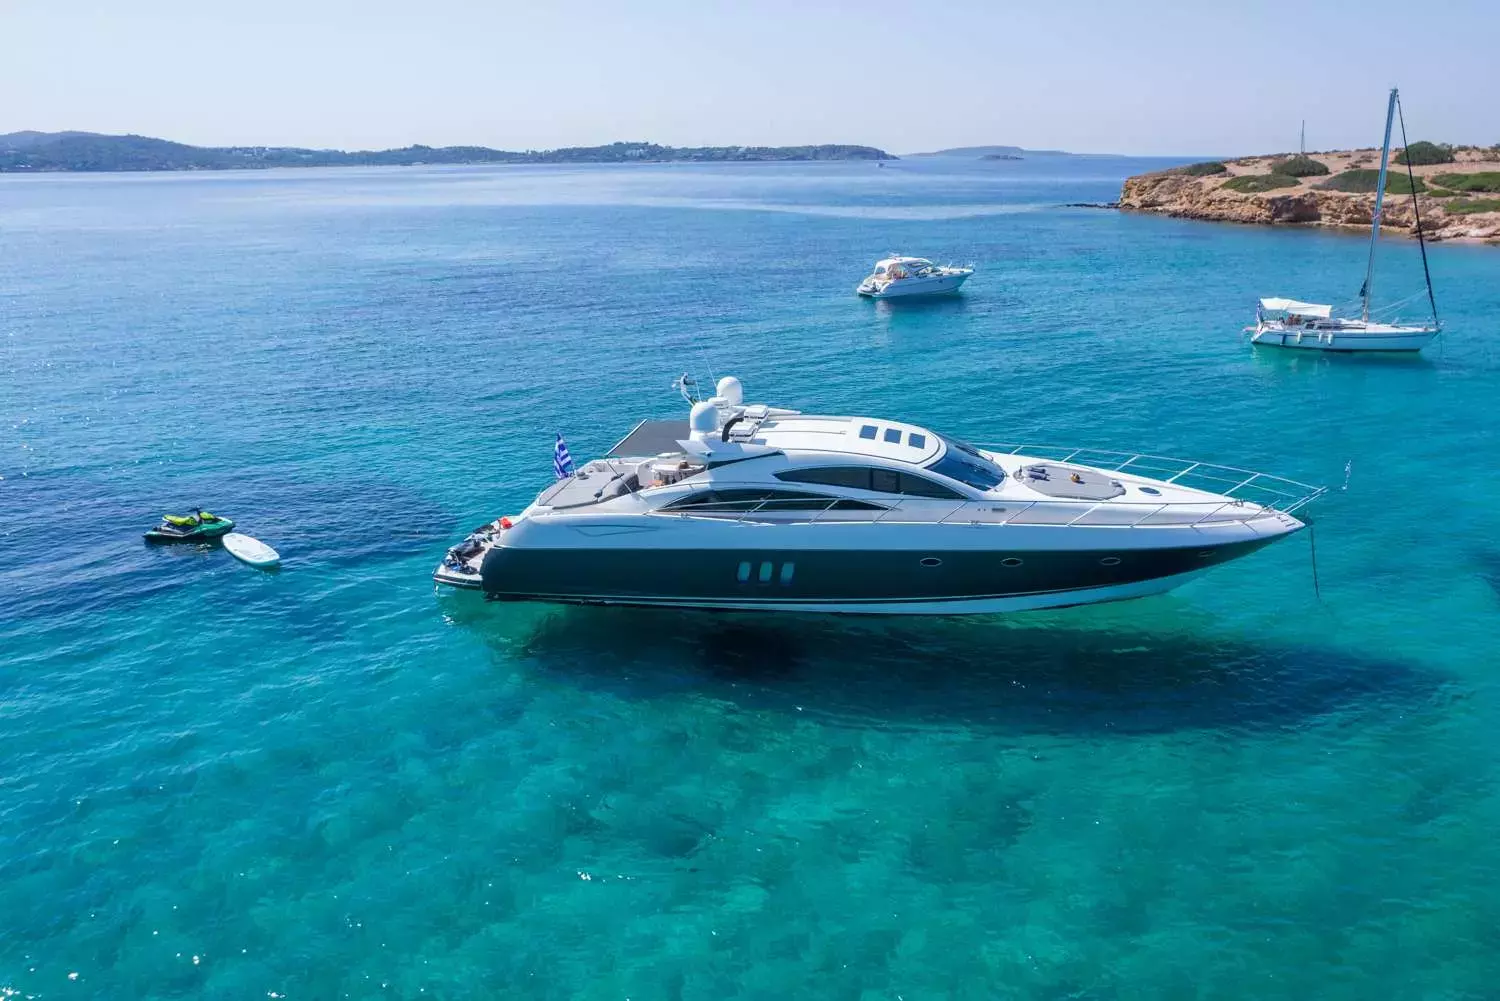 Elentari by Sunseeker - Top rates for a Charter of a private Motor Yacht in Greece